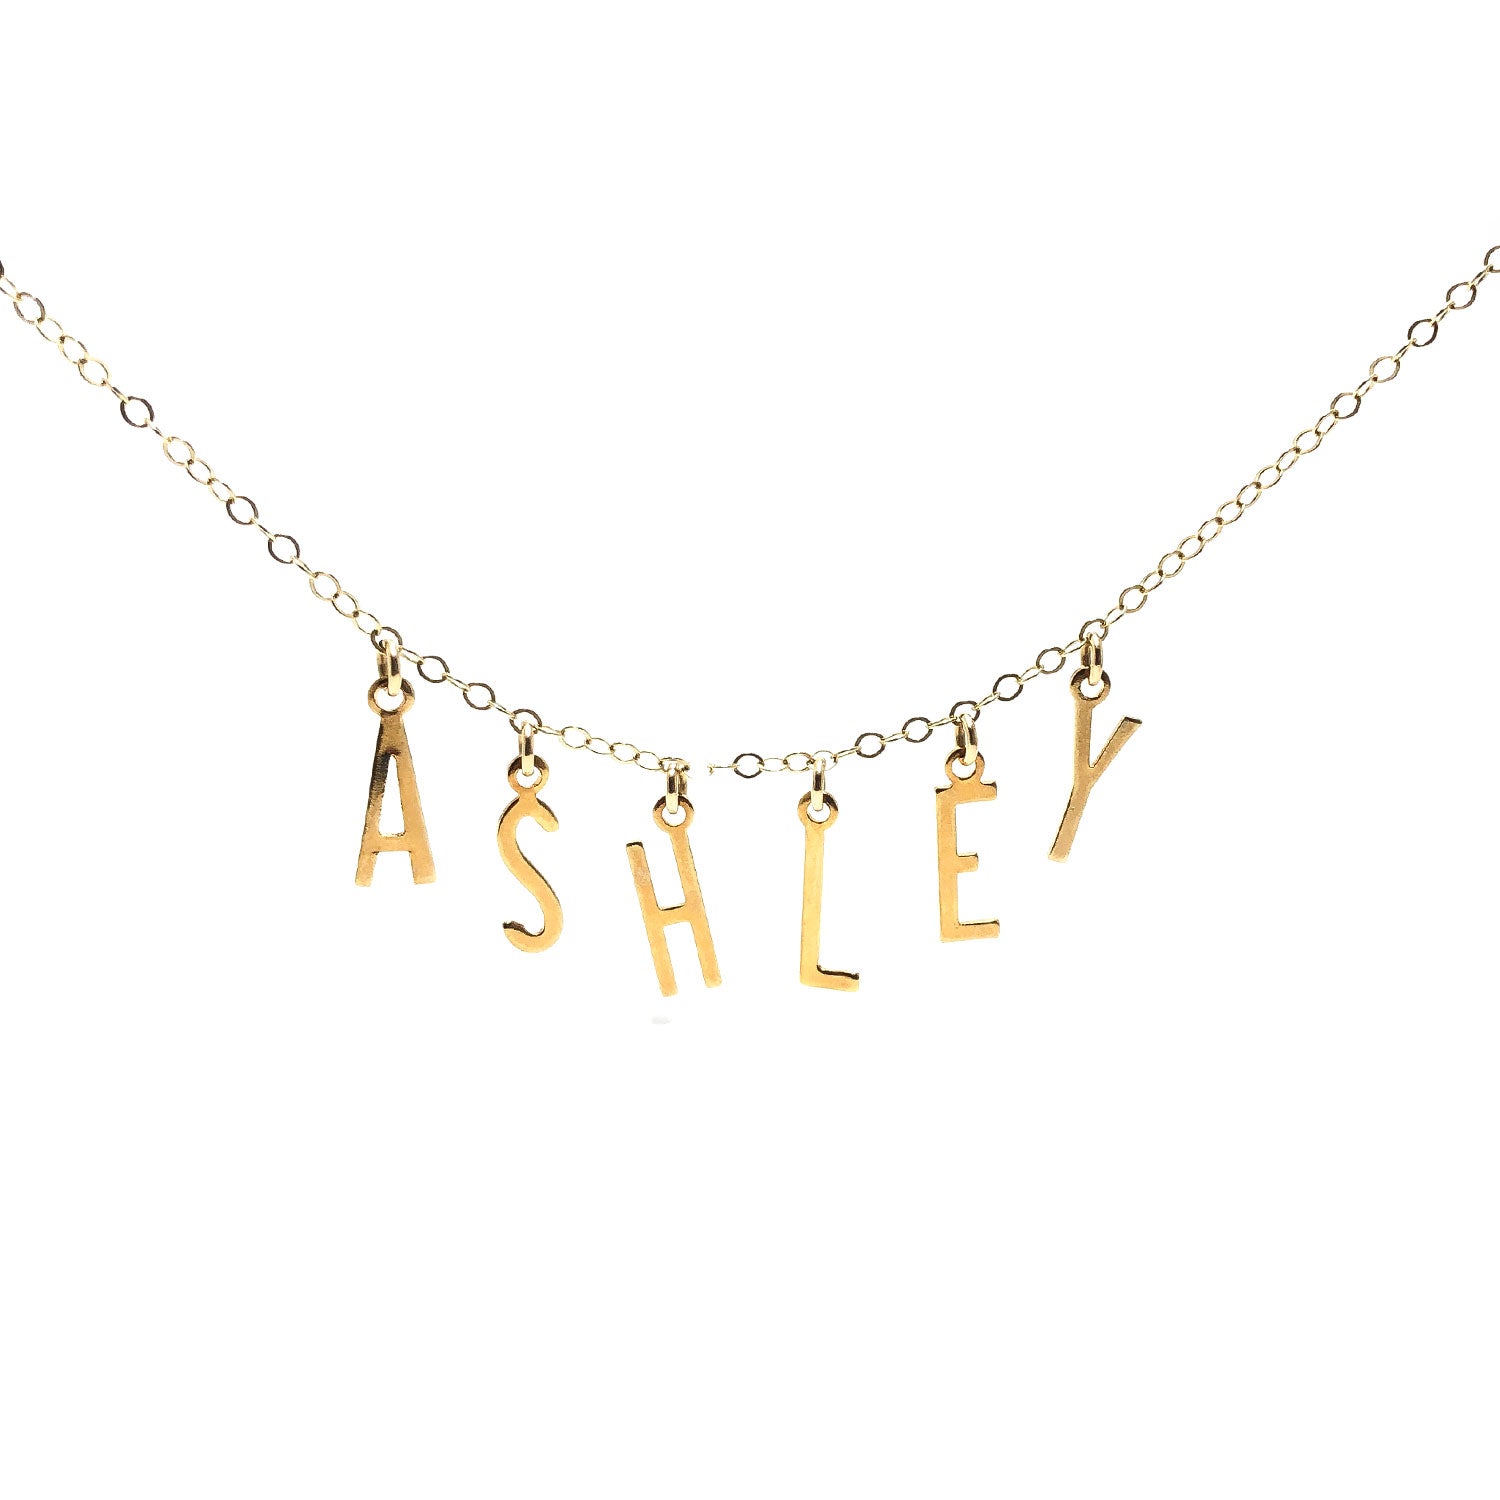 Moon and Lola - Belize Necklace on apex link chain with the name ASHLEY spelled out